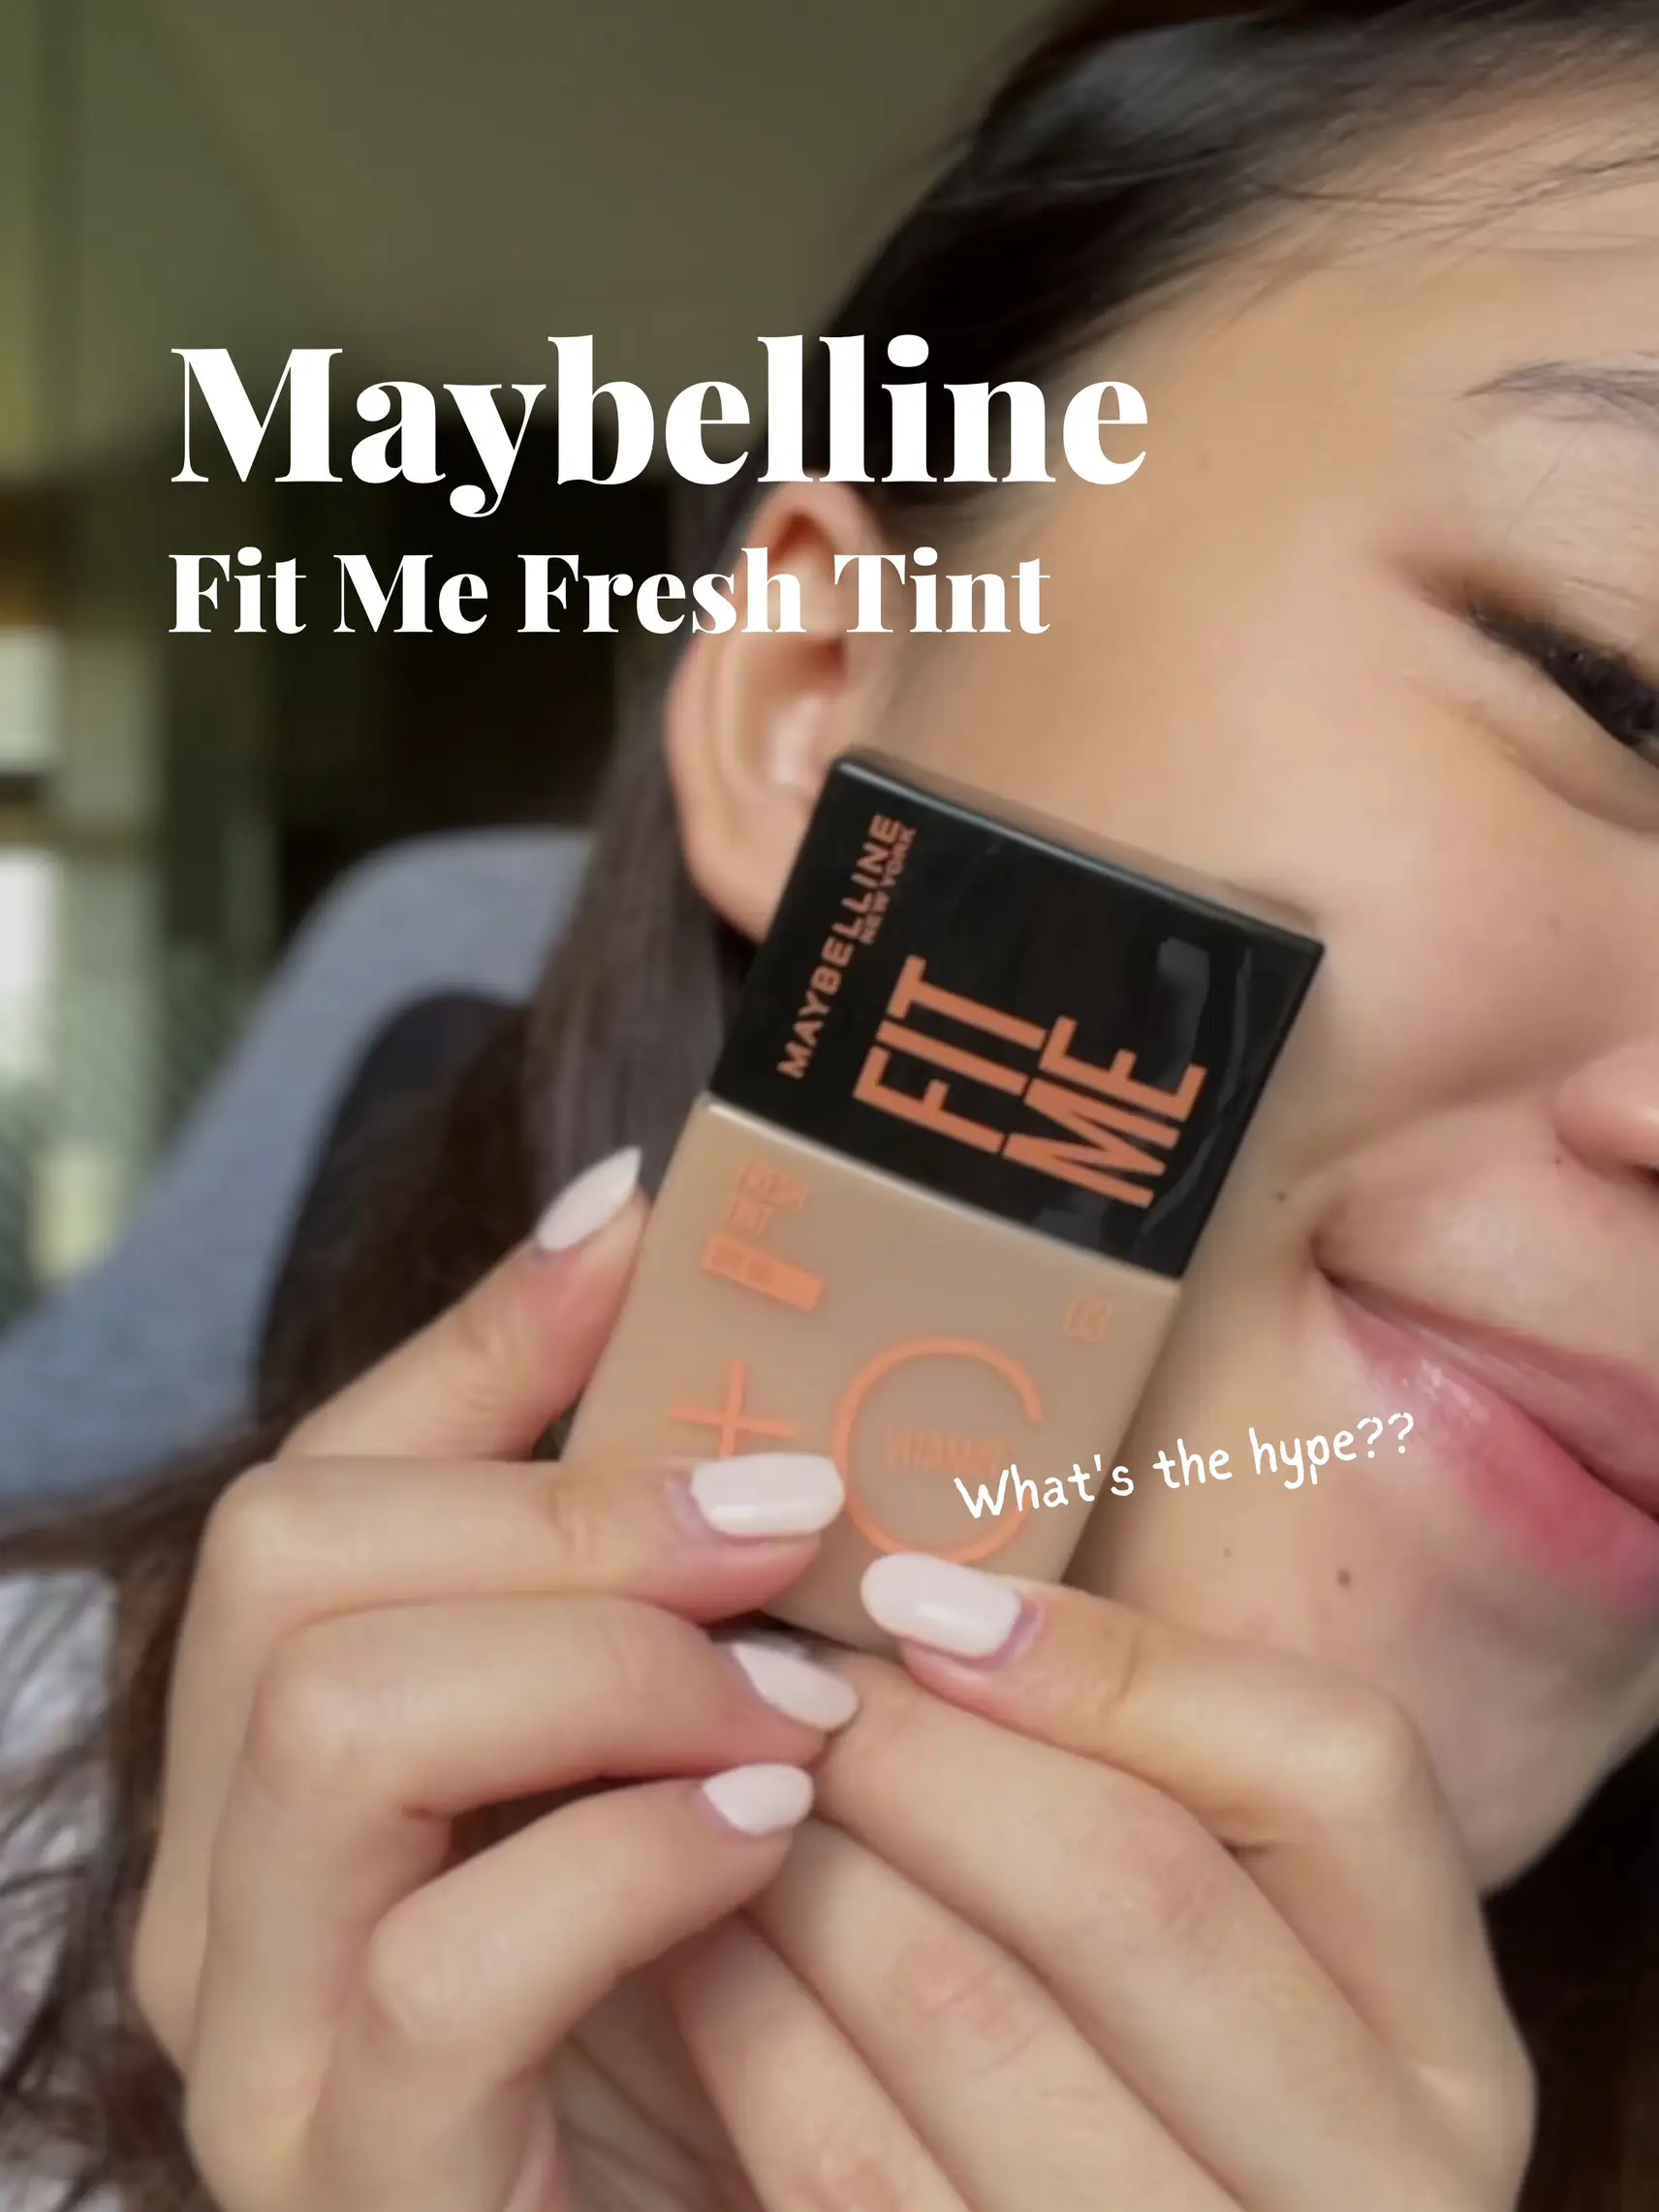 Comprar Base De Maquillaje Maybelline Ny Fit Me Fresh Tint Spf50 02 - 30ml